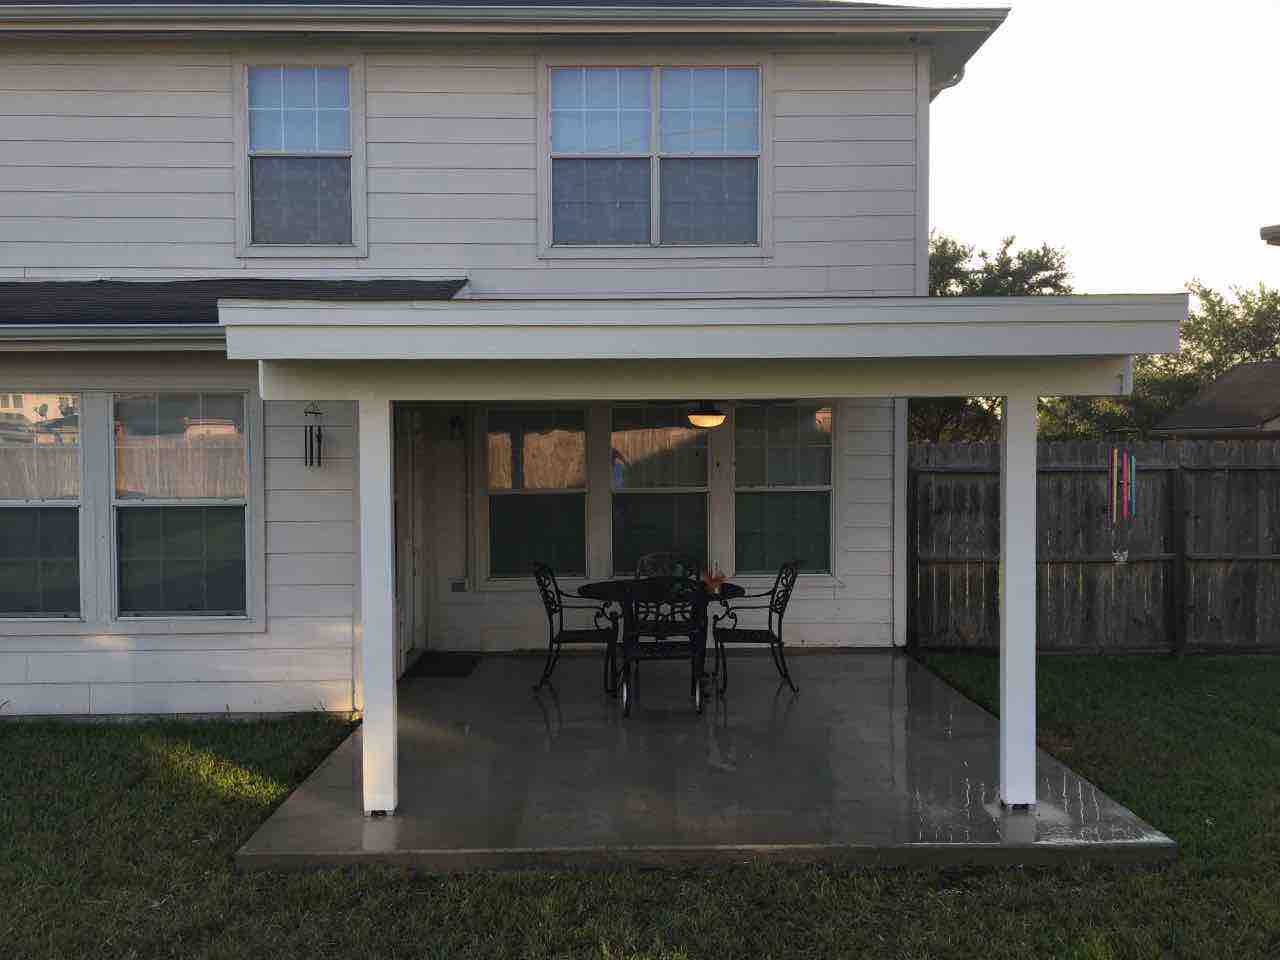 Pergola Covered Patio Covers Wood Building Materials with Composite Shingles and Ceiling Fan